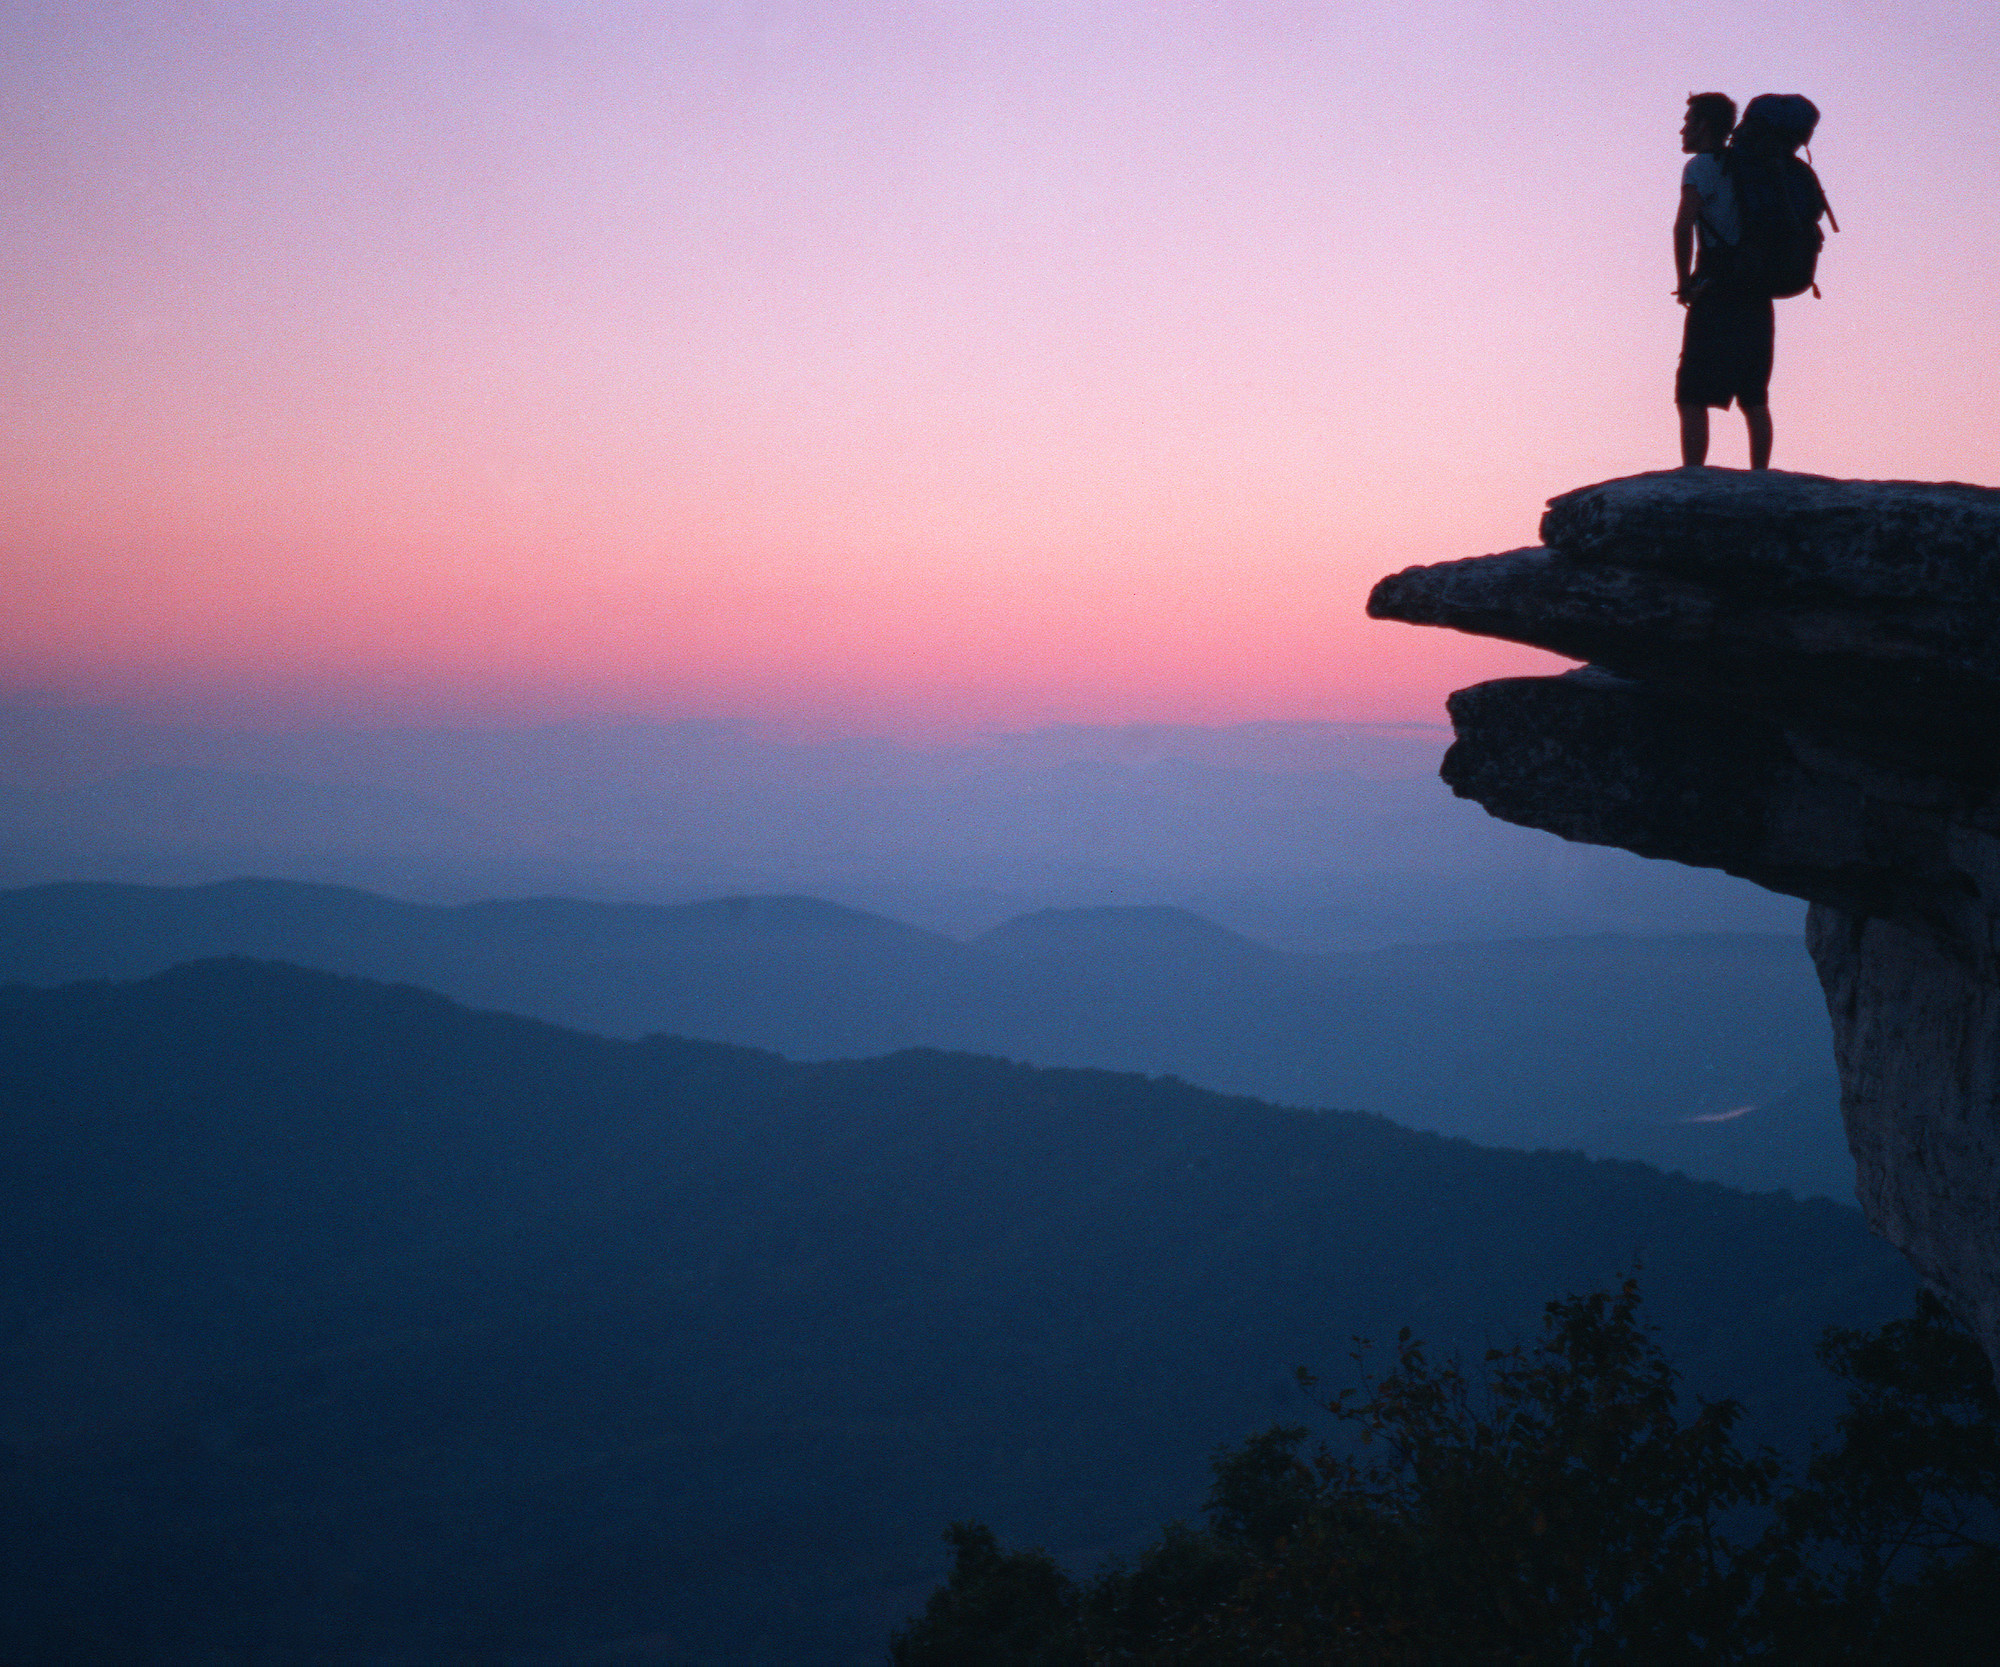 Silhouette of a man with backpack standing on McAfee Knob at sunset with mountains in the distance.